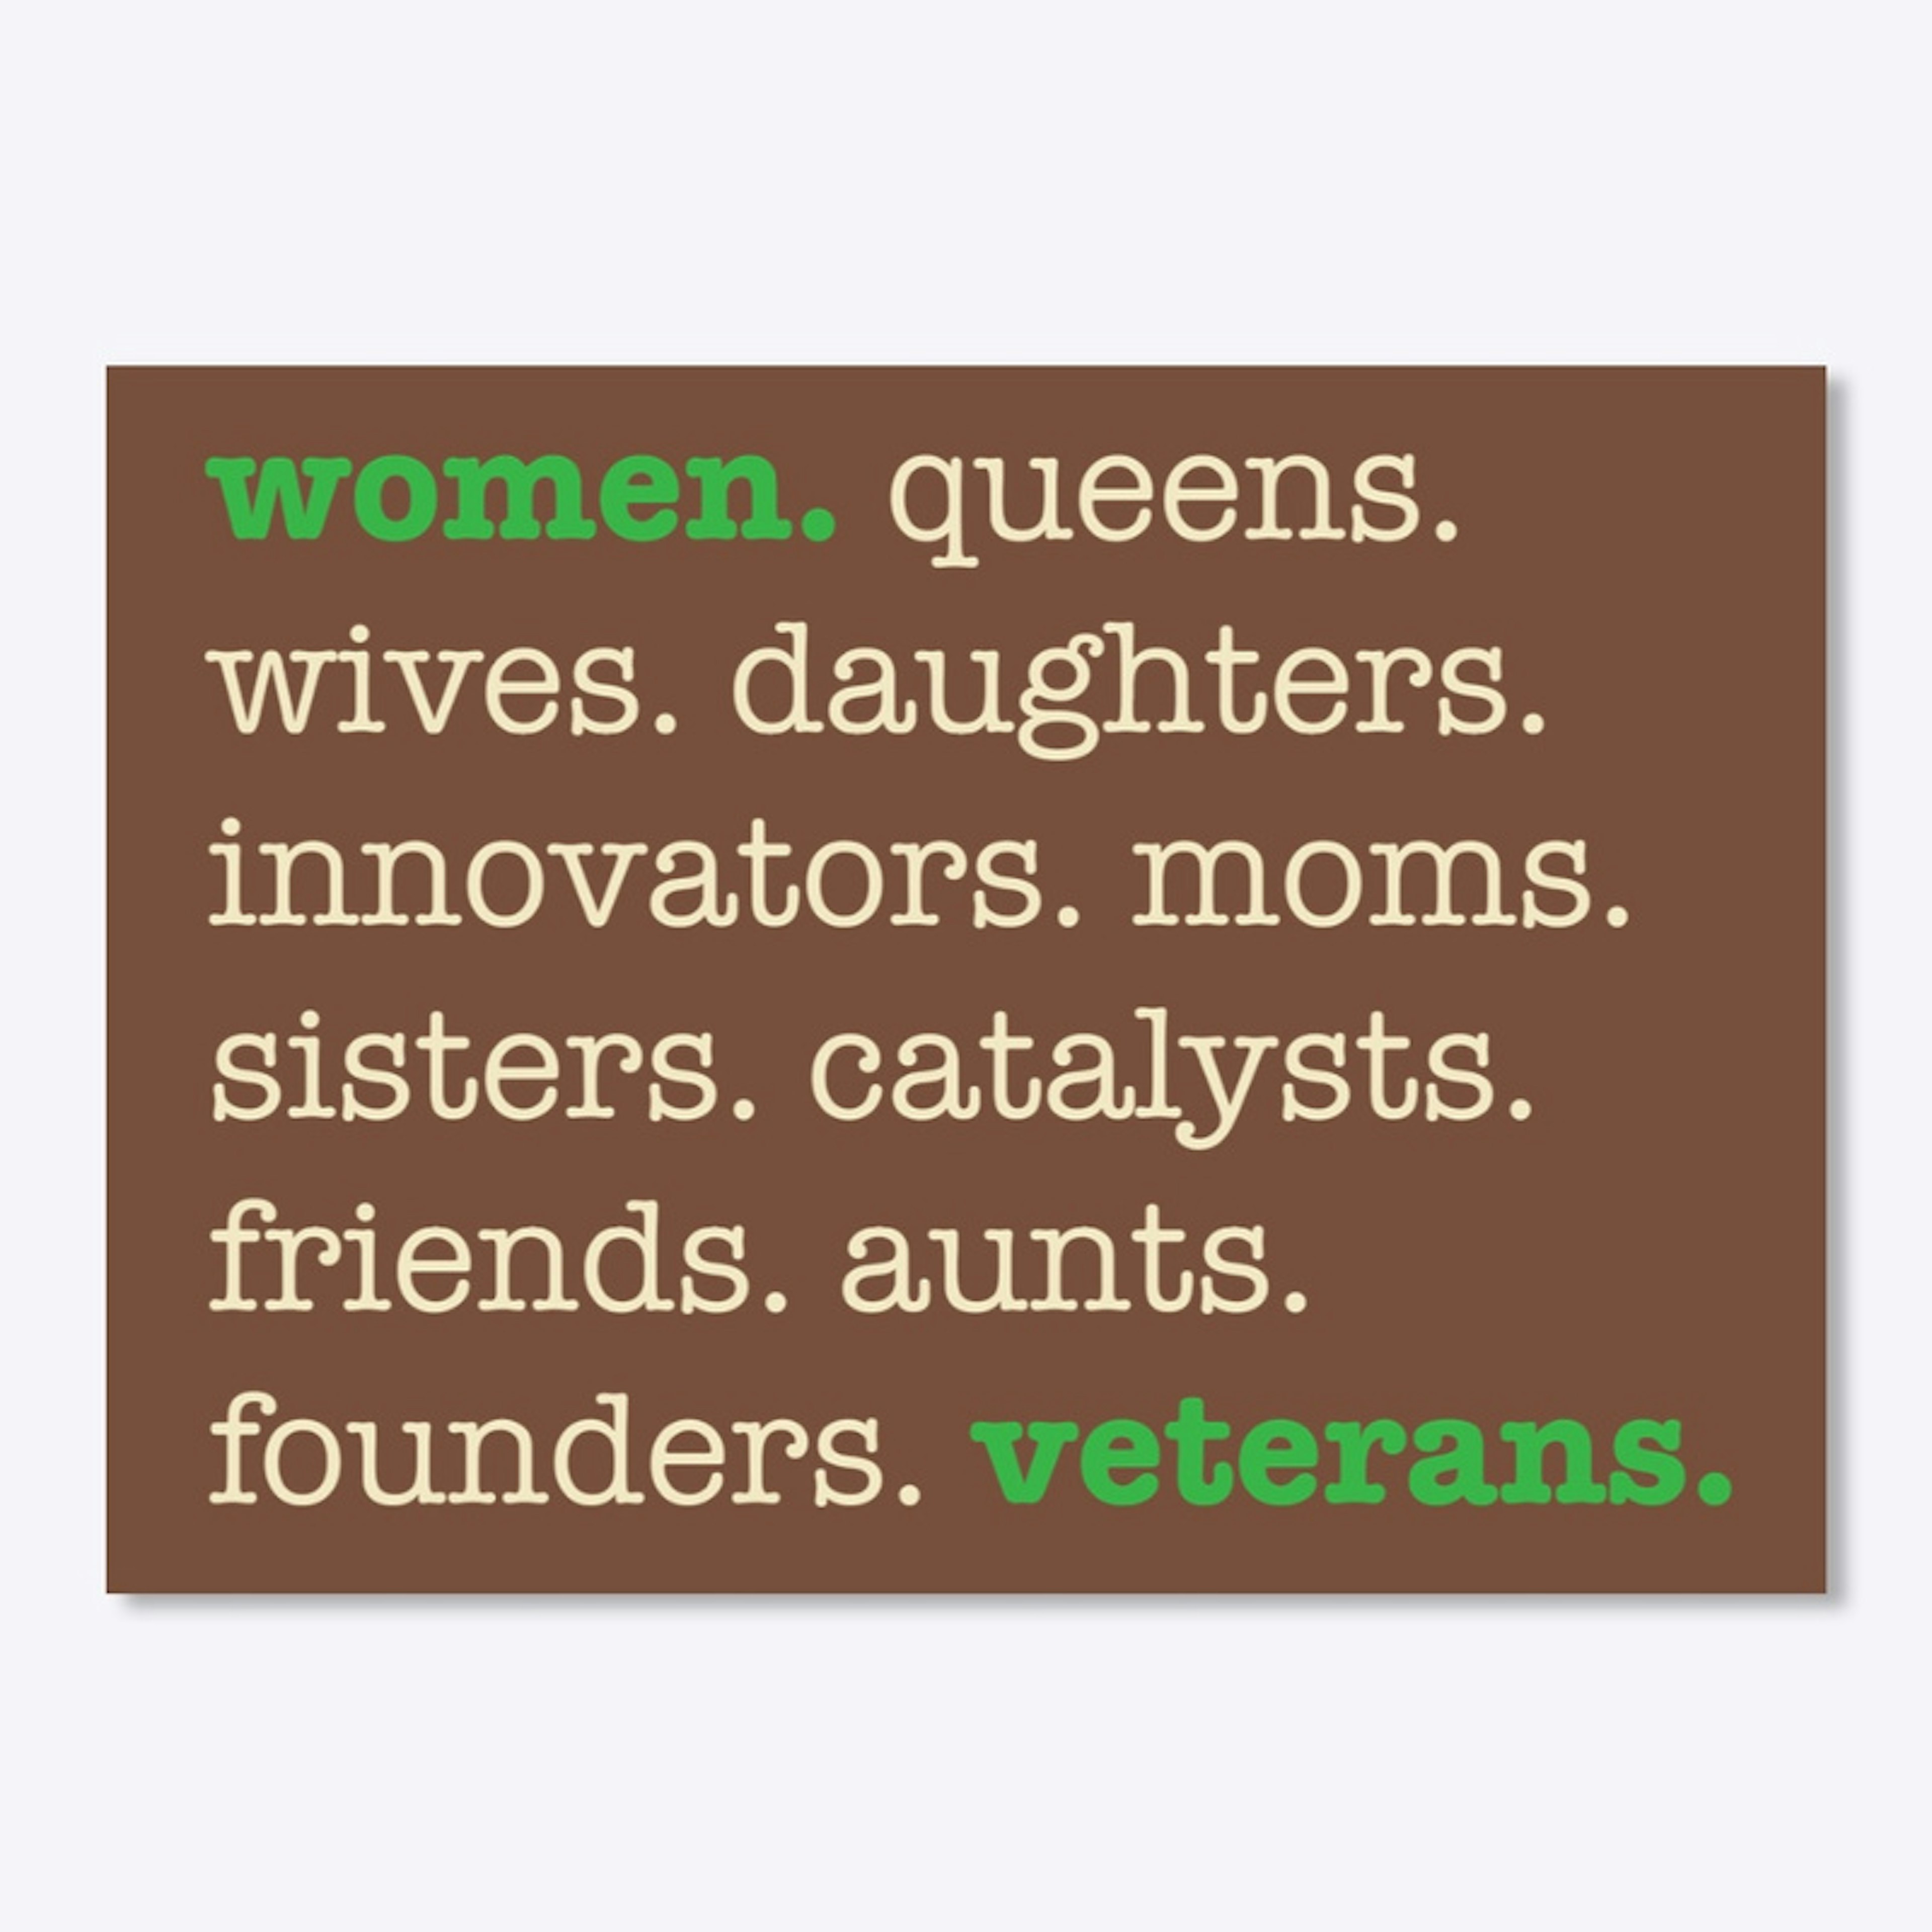 Women Veterans are queens, wives, more